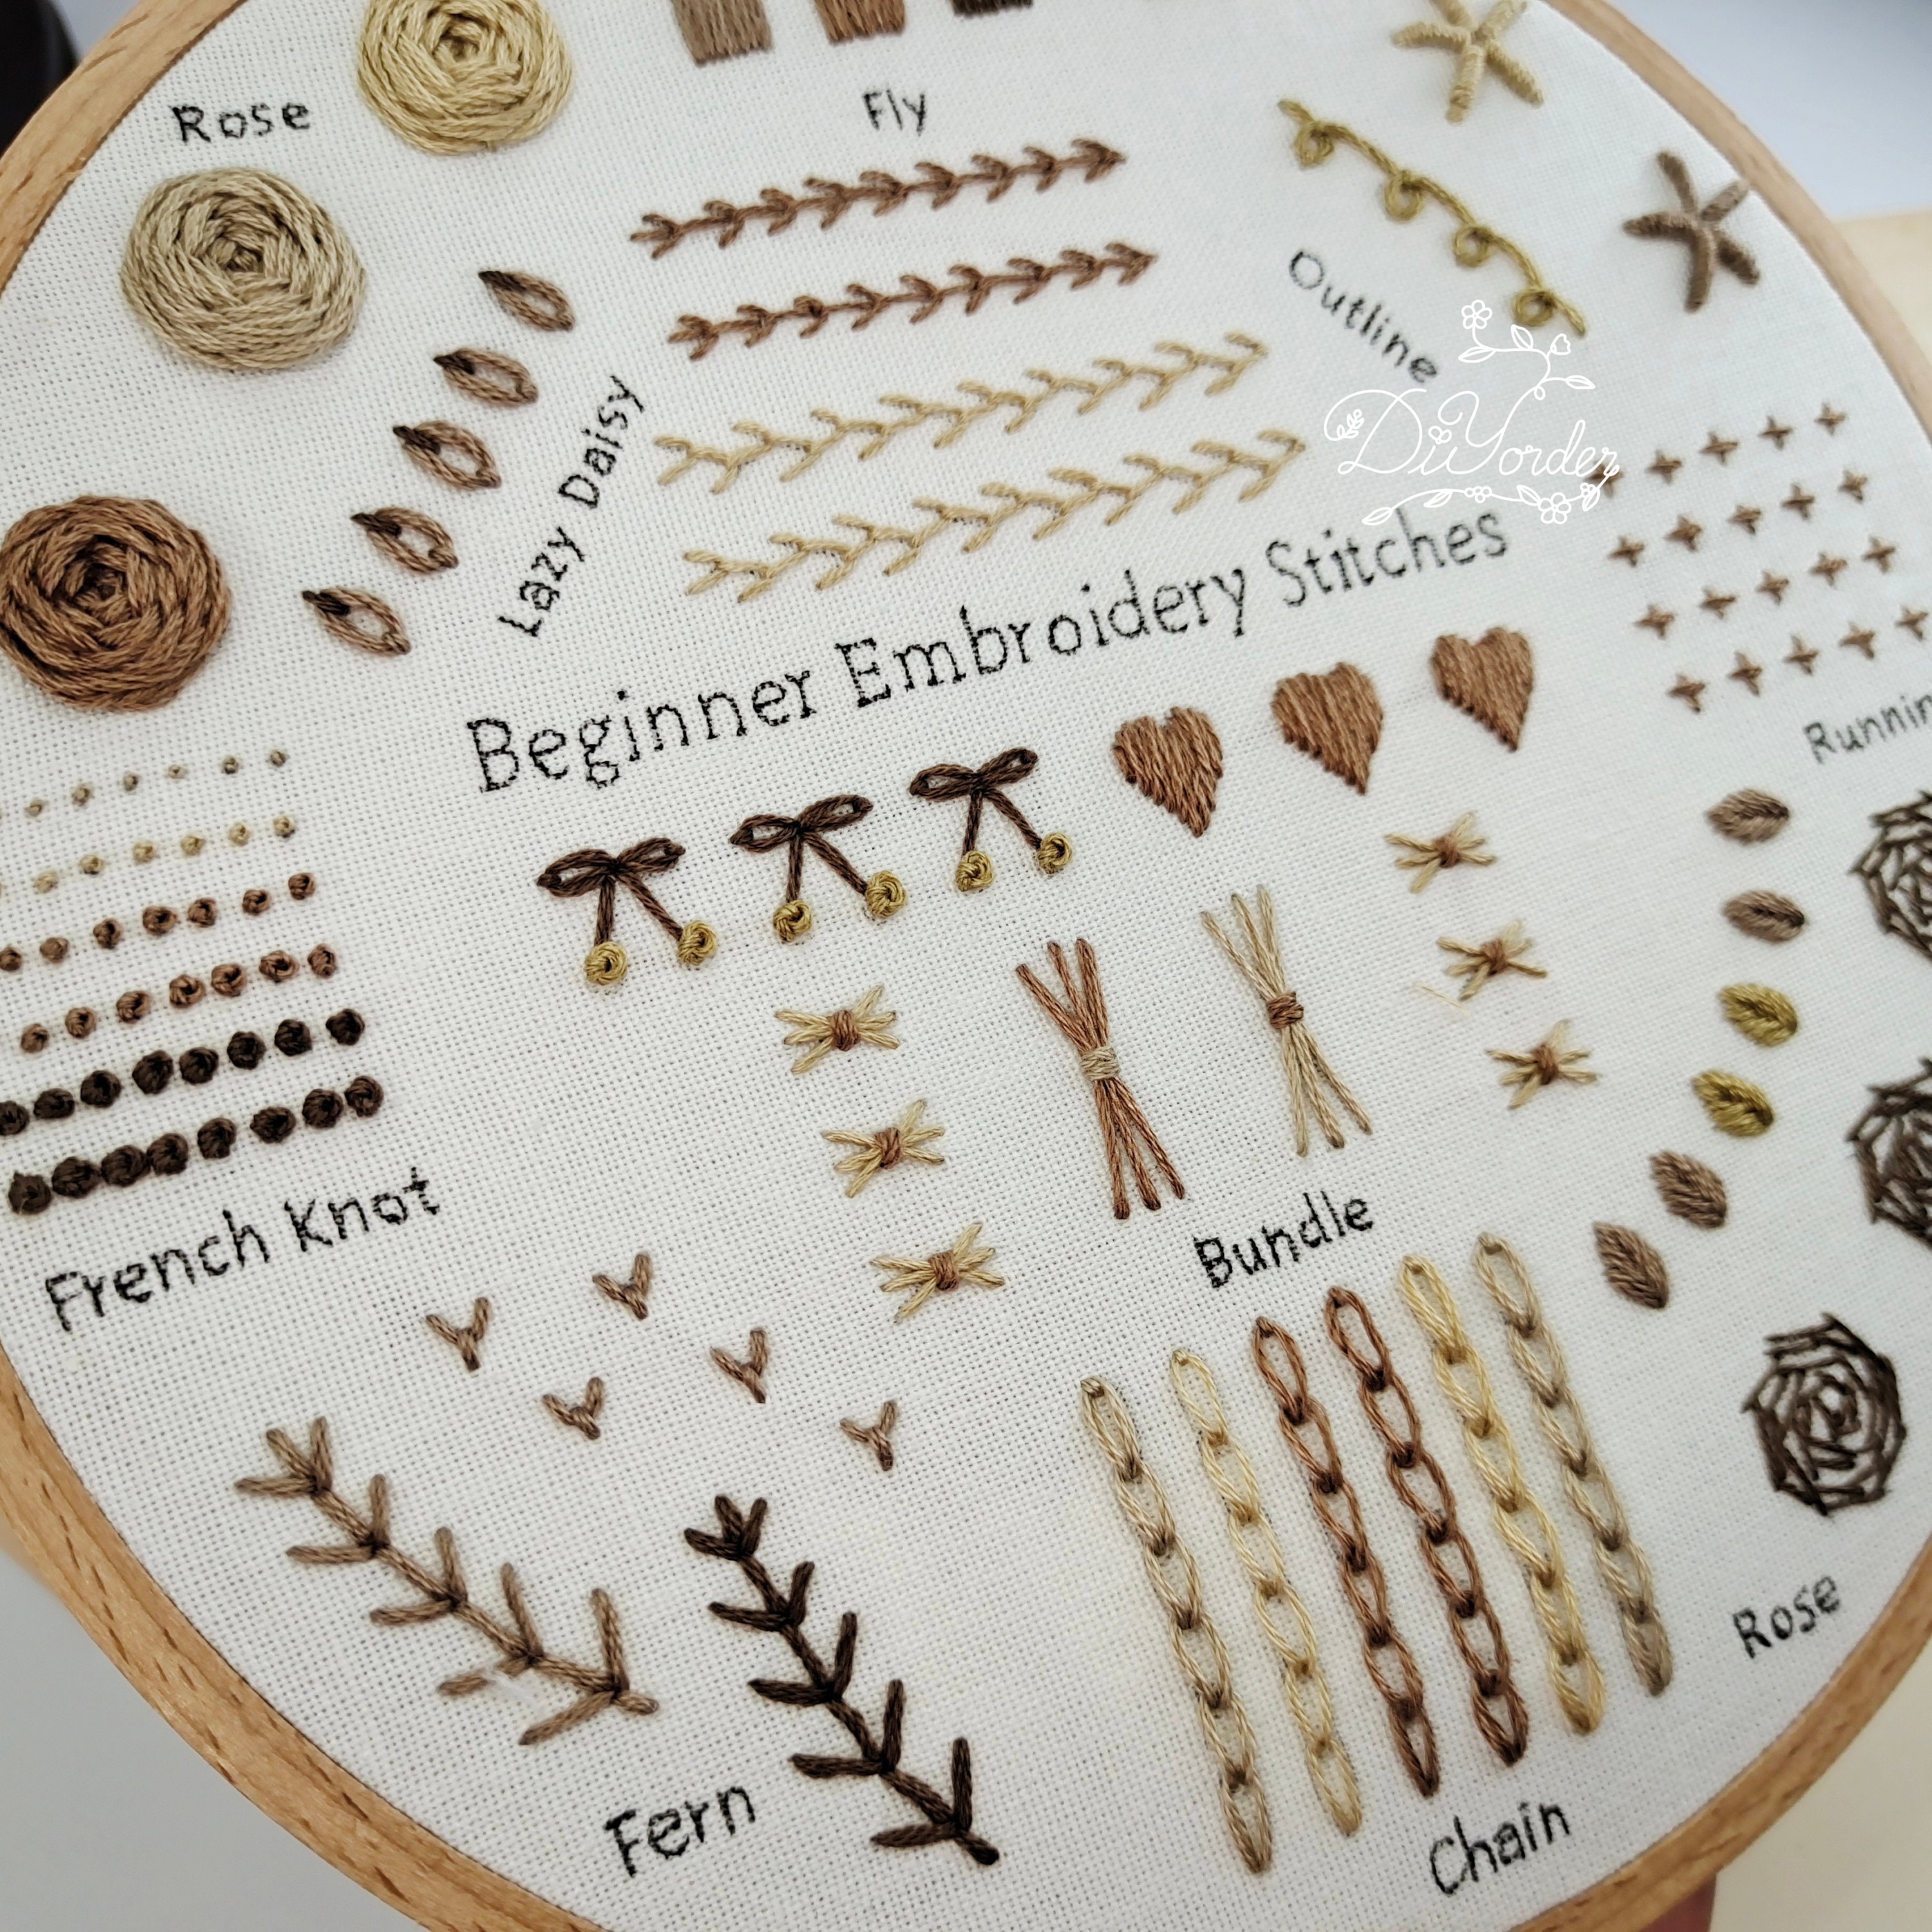 Embroidery FAQ, Best Embroidery Kits for Beginners